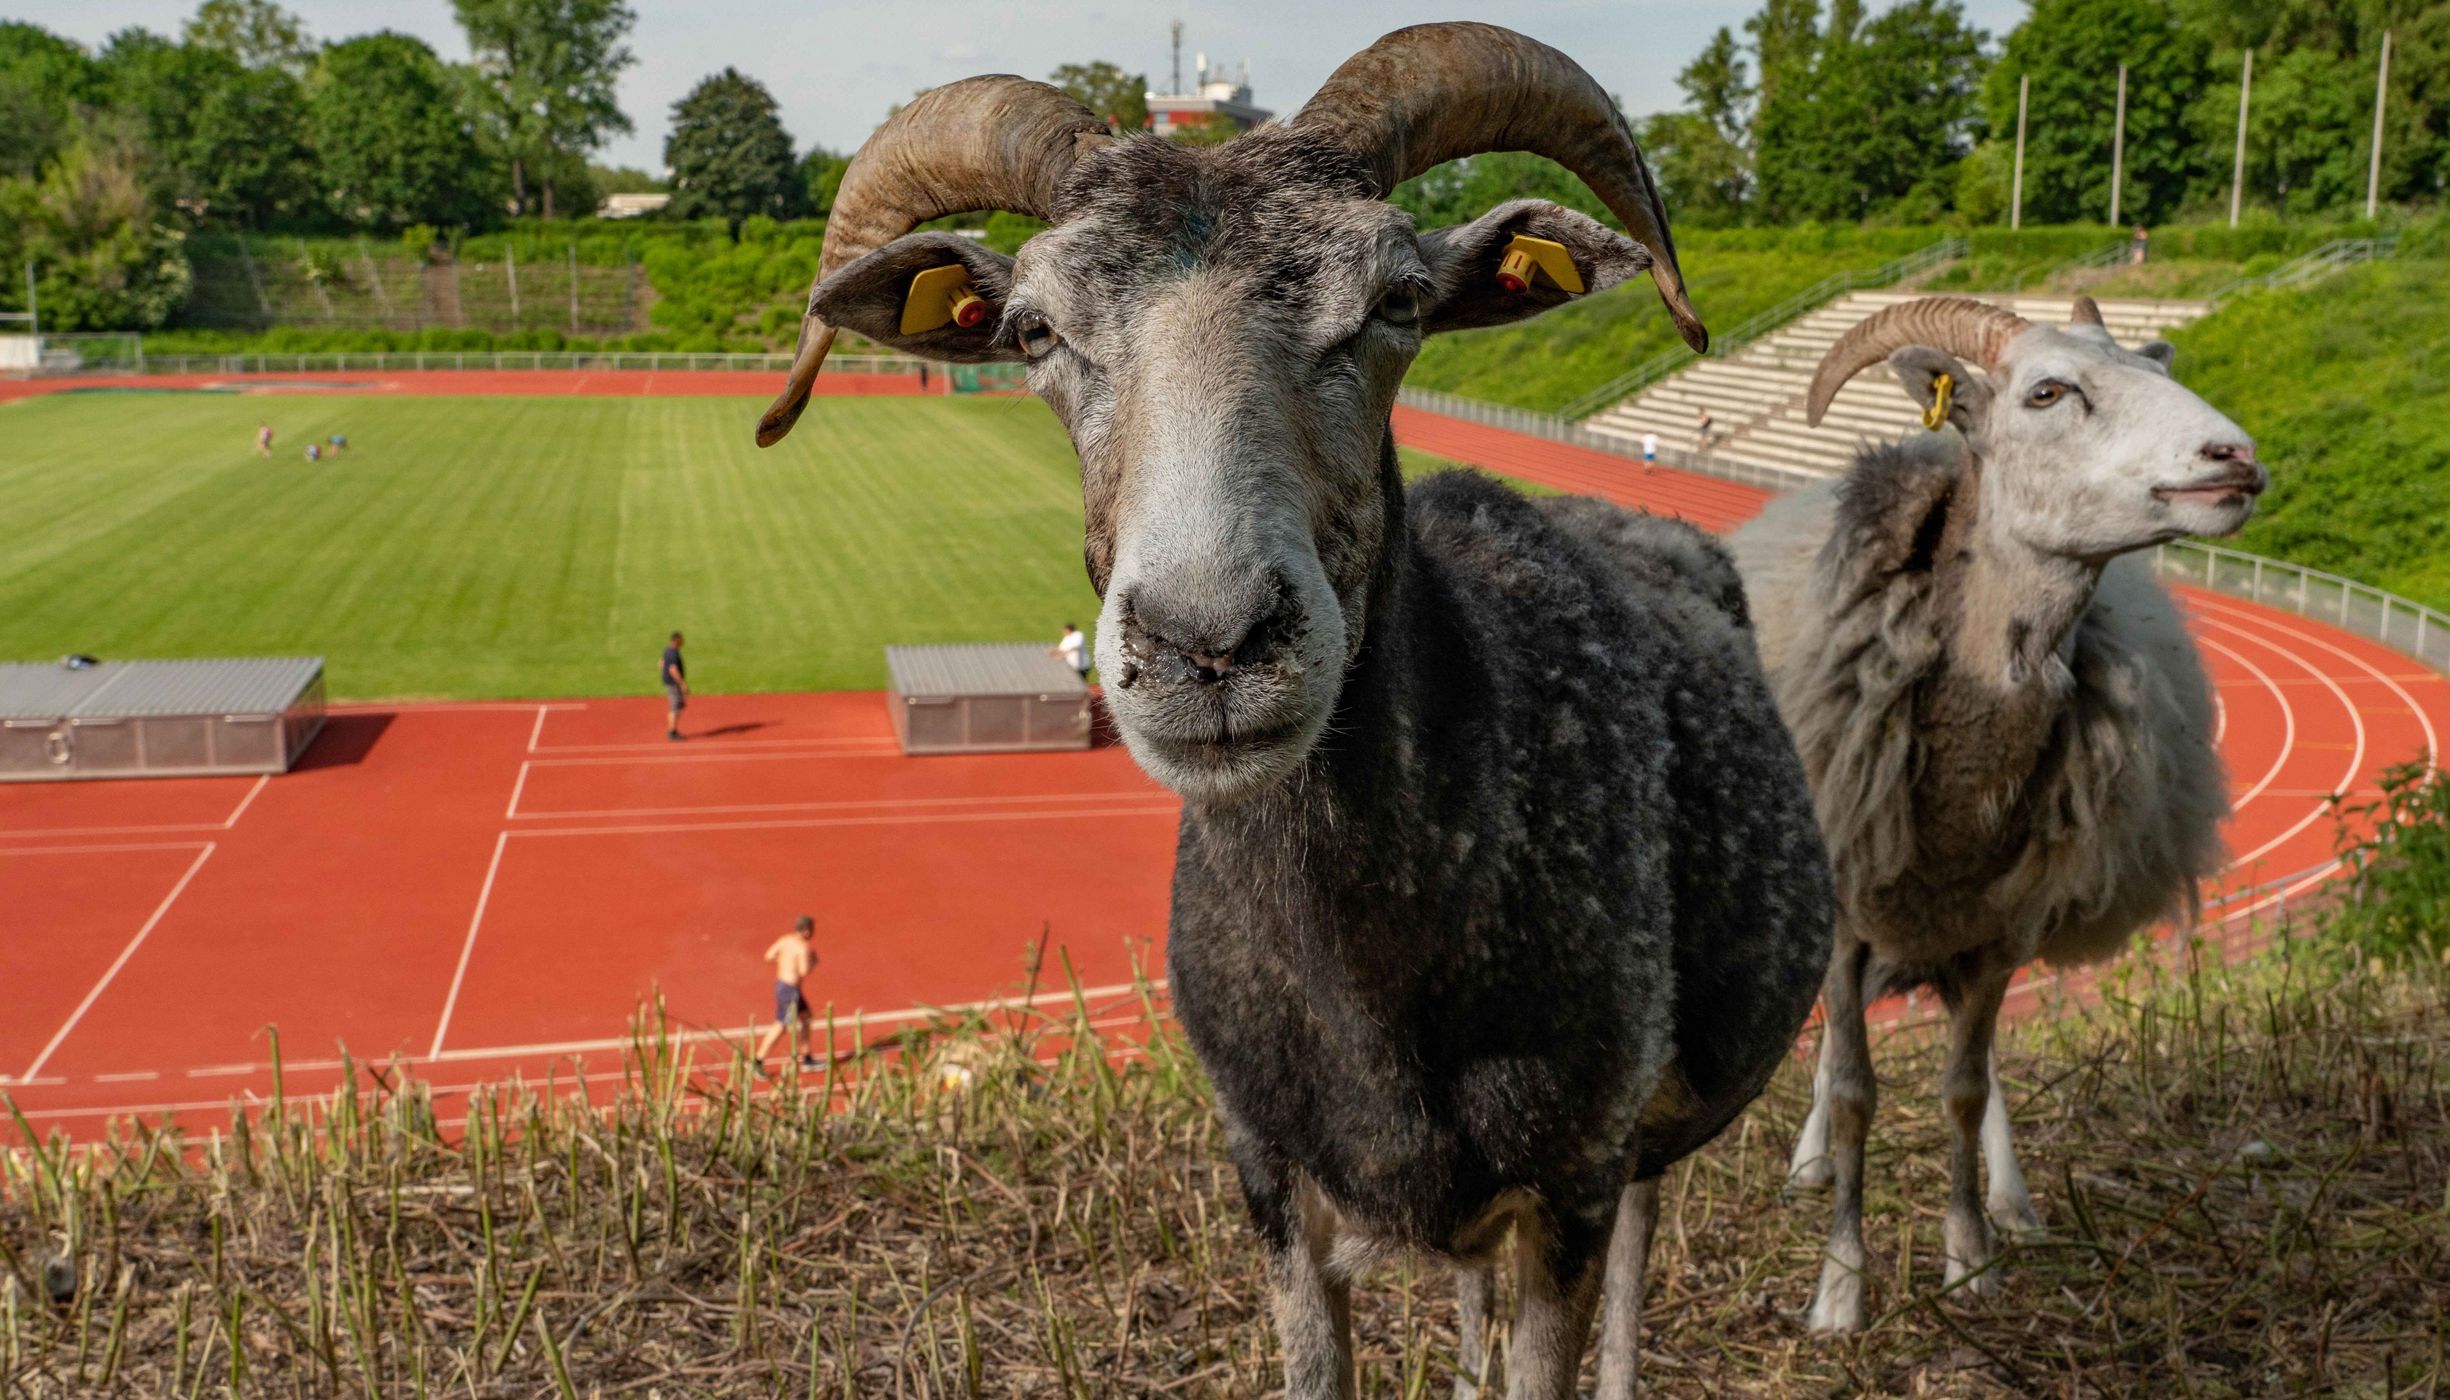 Sheep with horns face camera with track and field in the background.